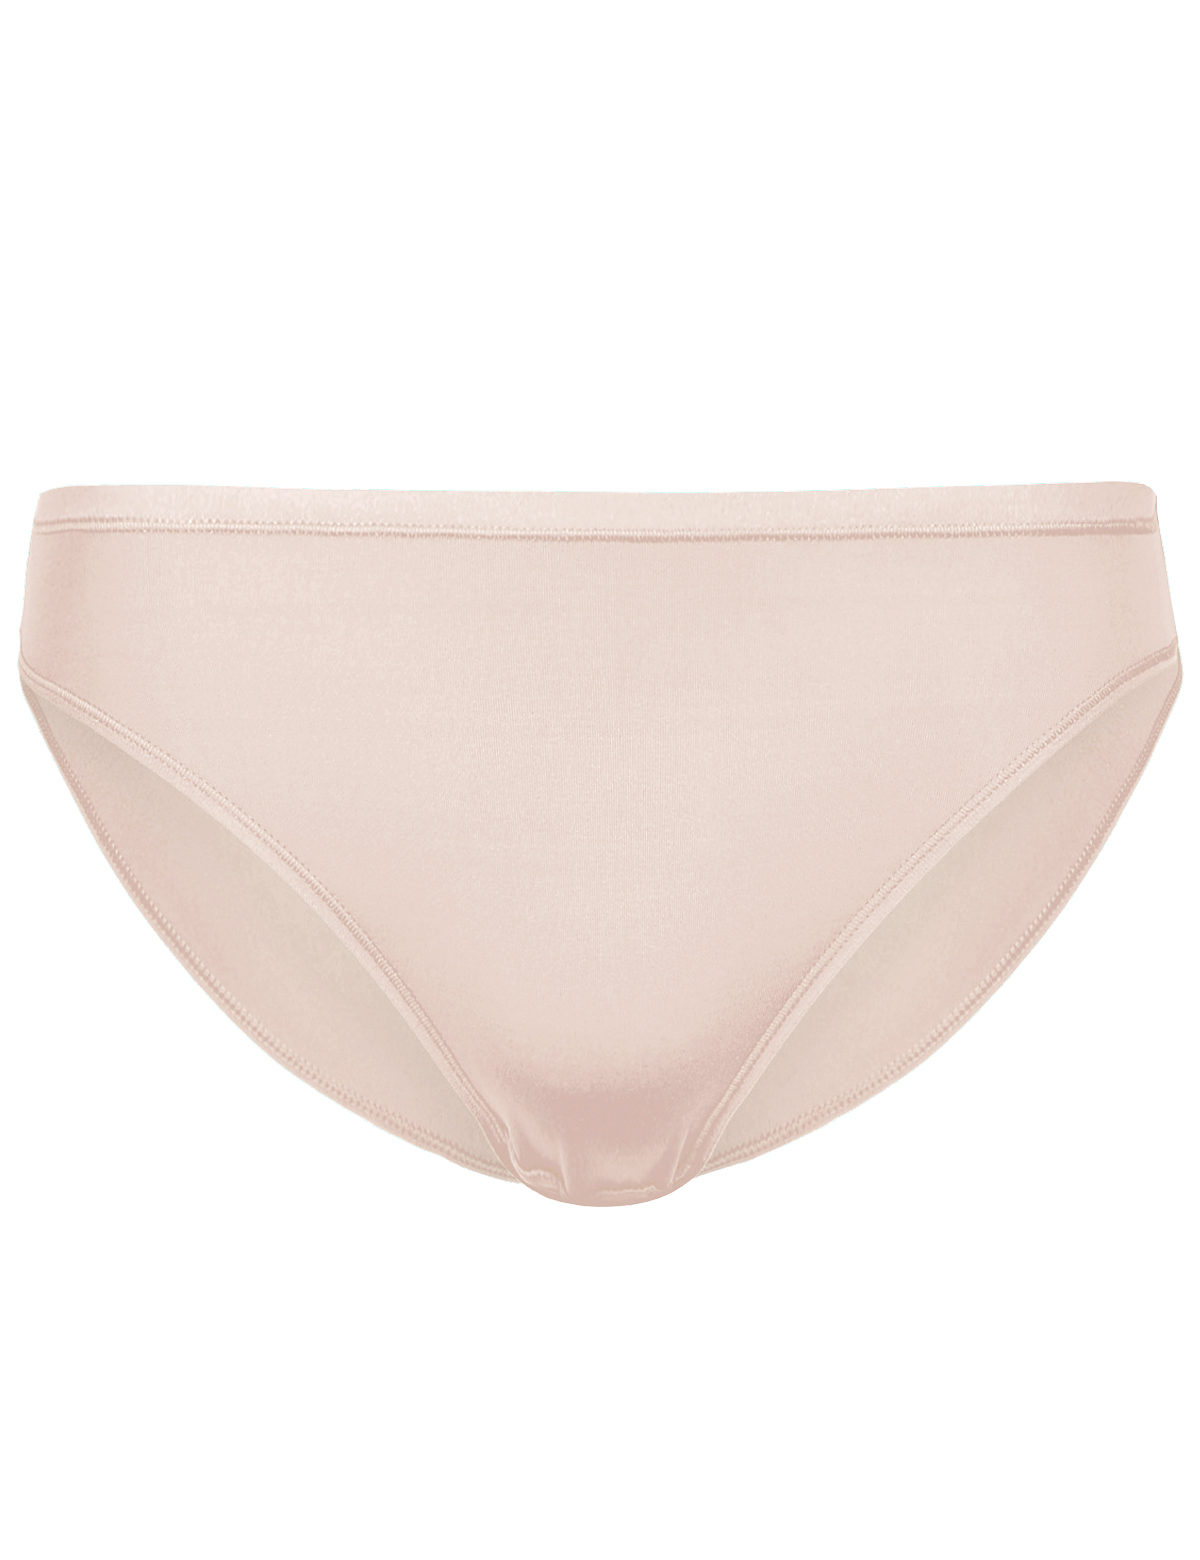 Marks and Spencer - - M&5 PINK No VPL Microfibre High Leg Knickers ...